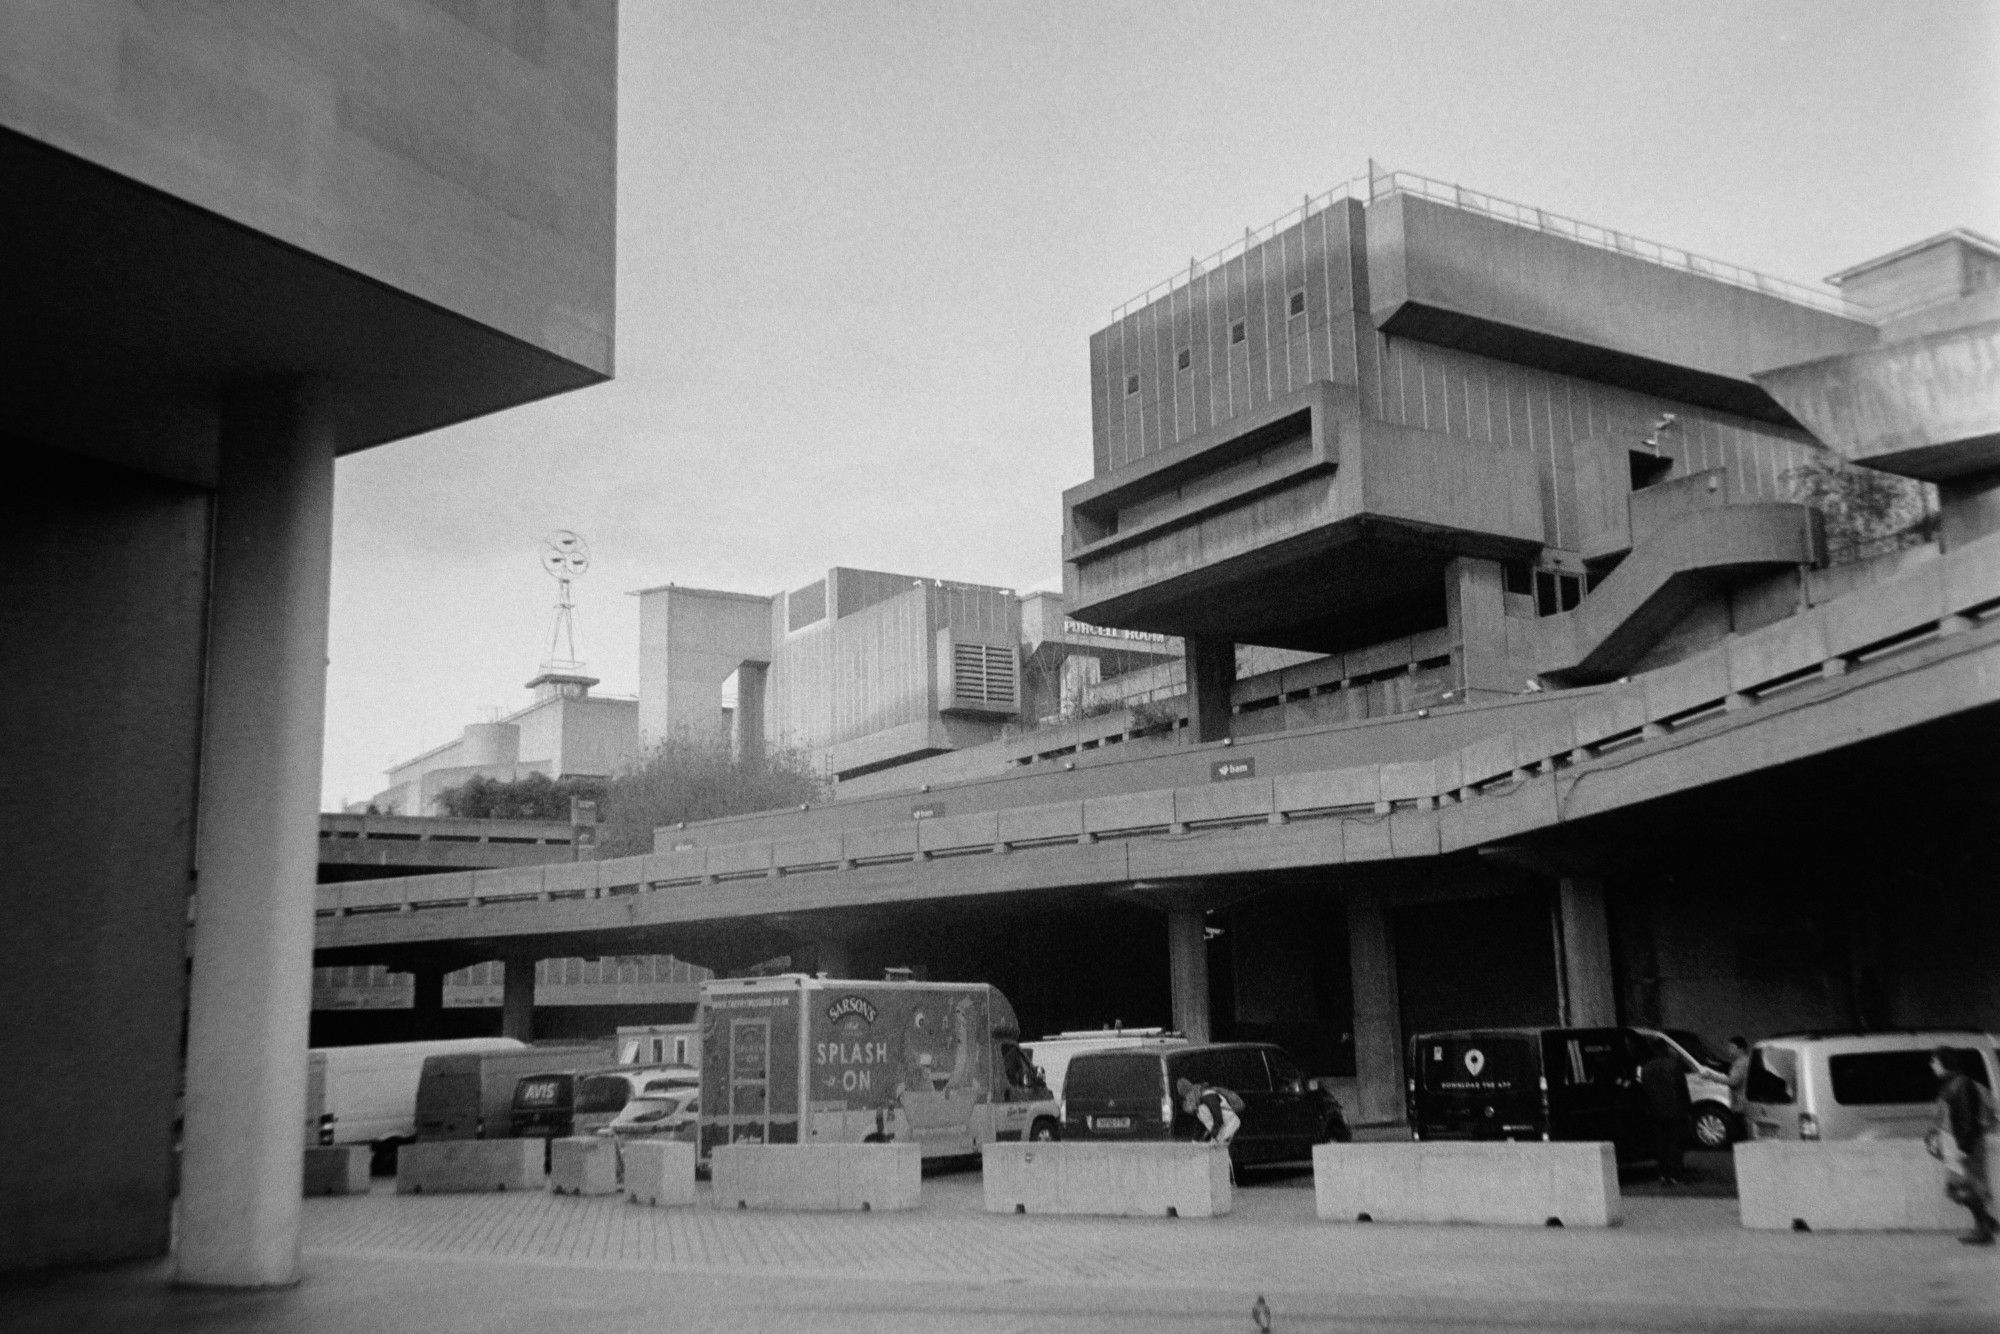 a black and white photograph of the Barbican/South Bank